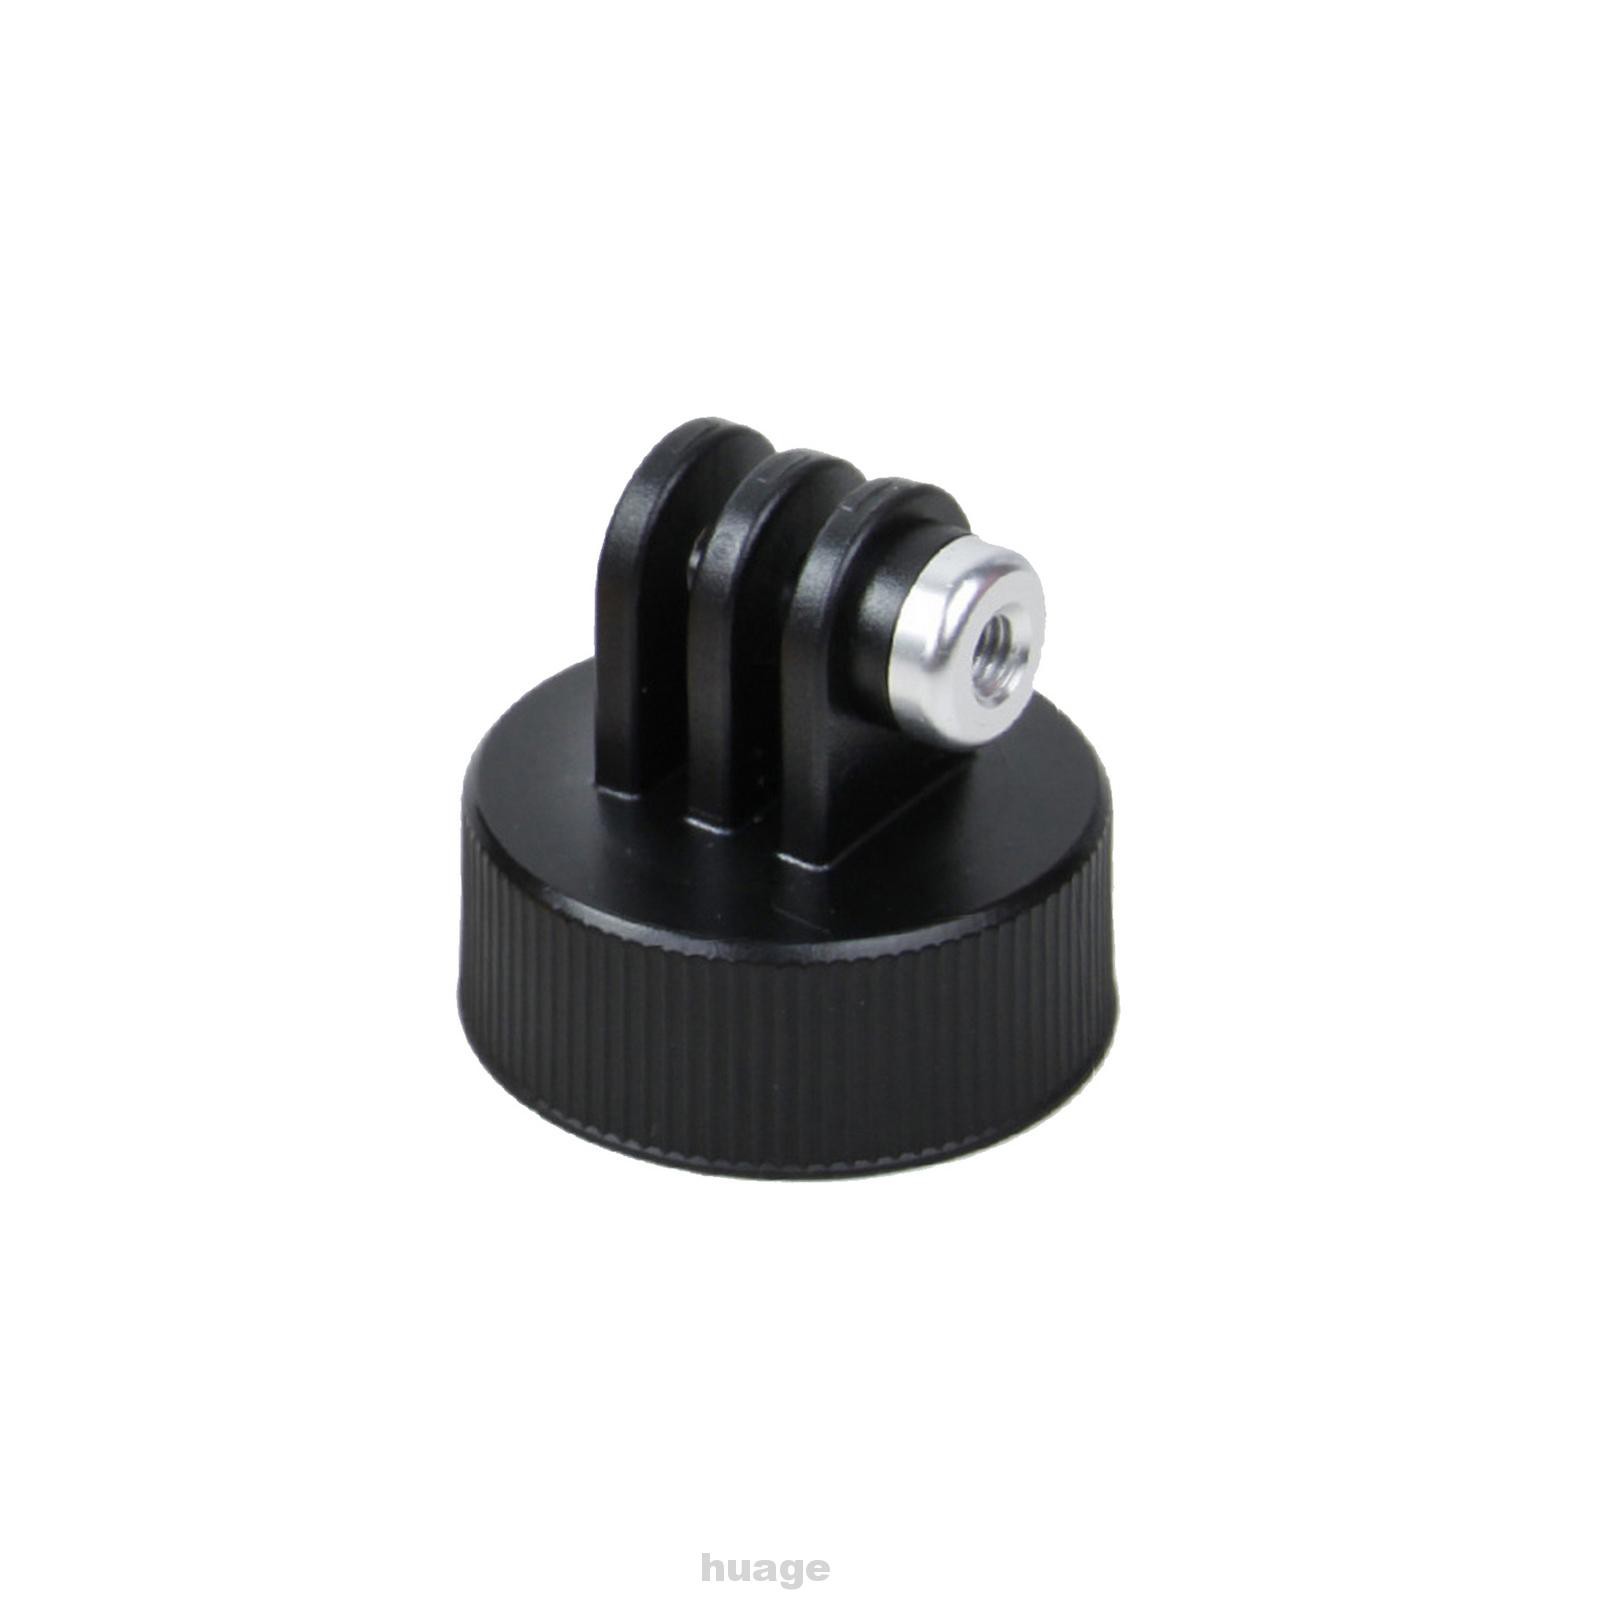 Bottle Mount Adapter Attachment Camera Monopod Connector DIY Holder Practical Universal For GoPro